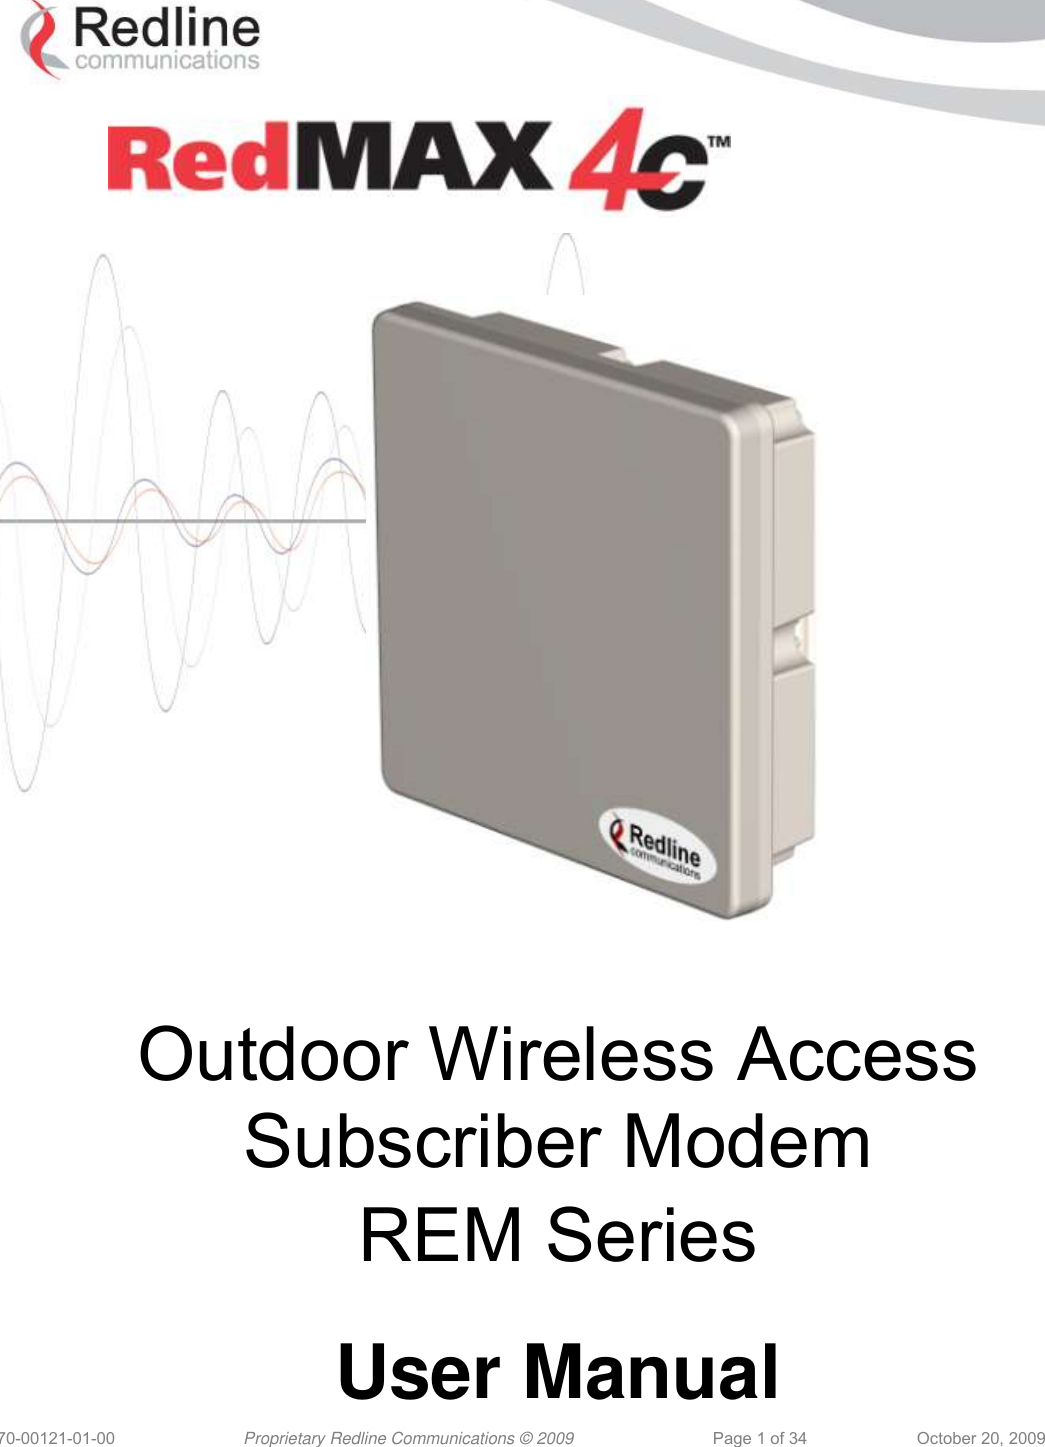  70-00121-01-00 Proprietary Redline Communications © 2009   Page 1 of 34 October 20, 2009          Outdoor Wireless Access Subscriber Modem REM Series  User Manual 